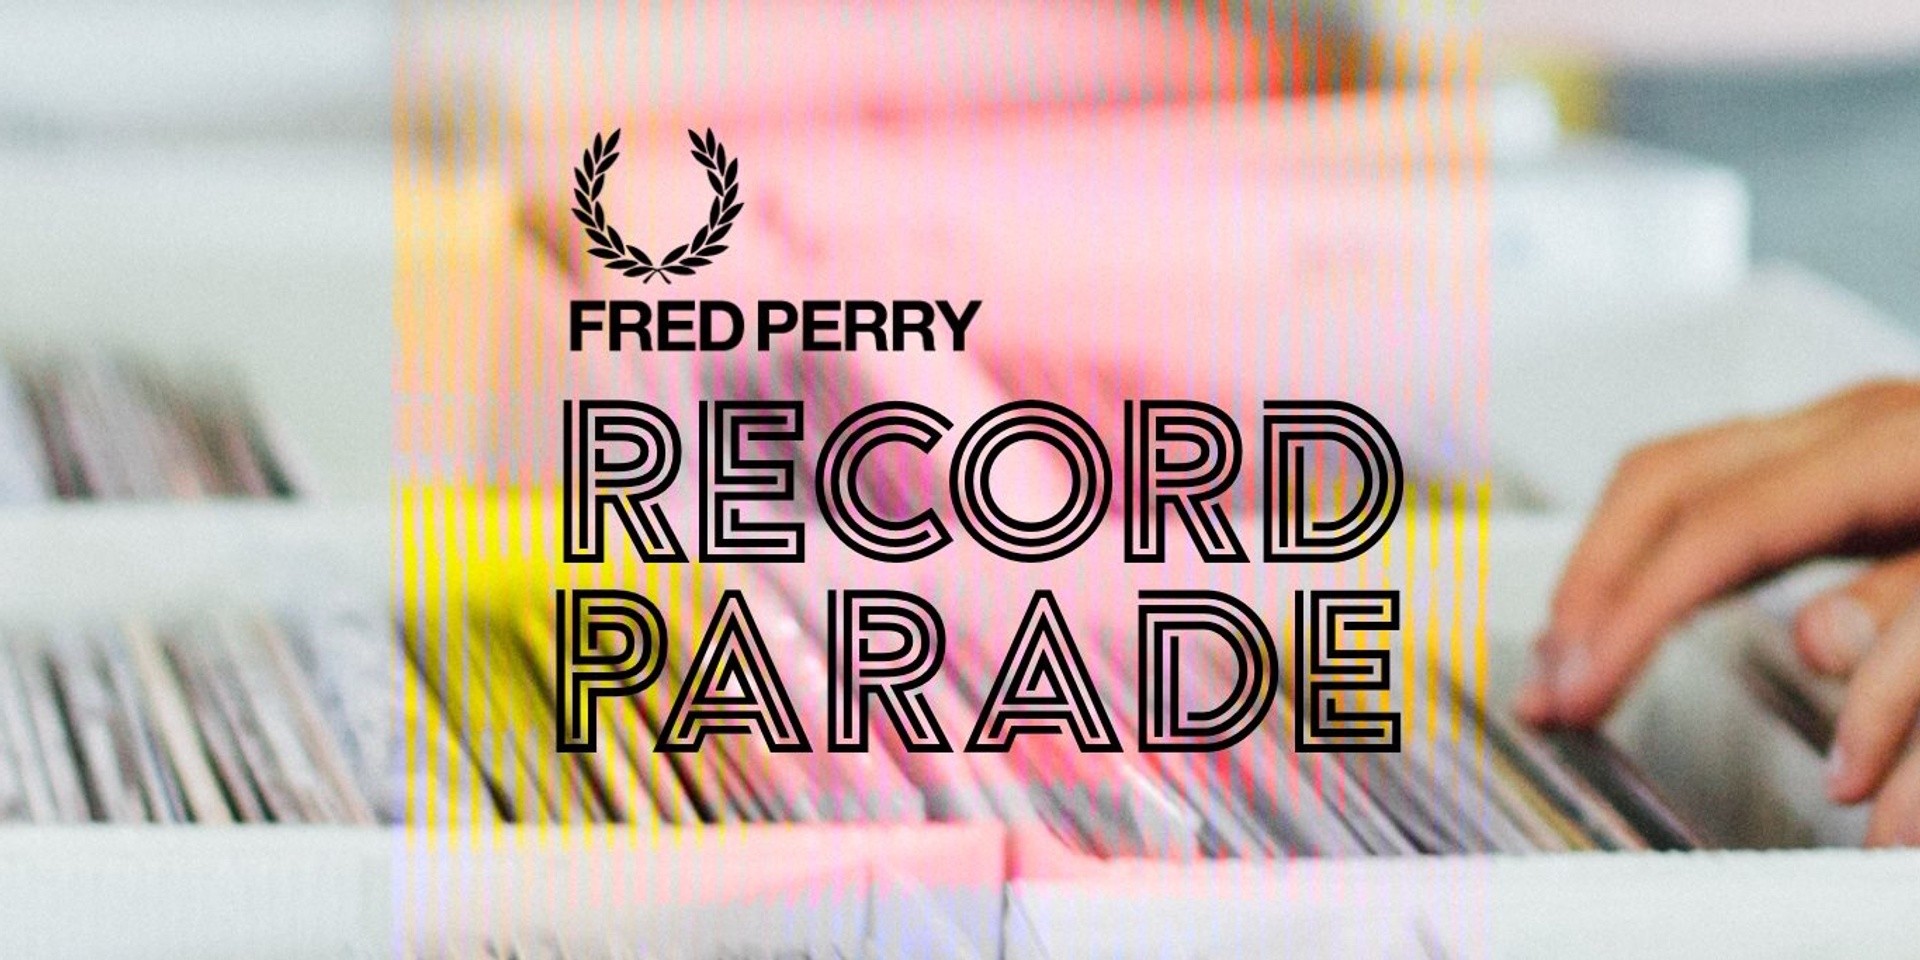 Fred Perry's Record Parade is bringing vinyl heaven to Cebu